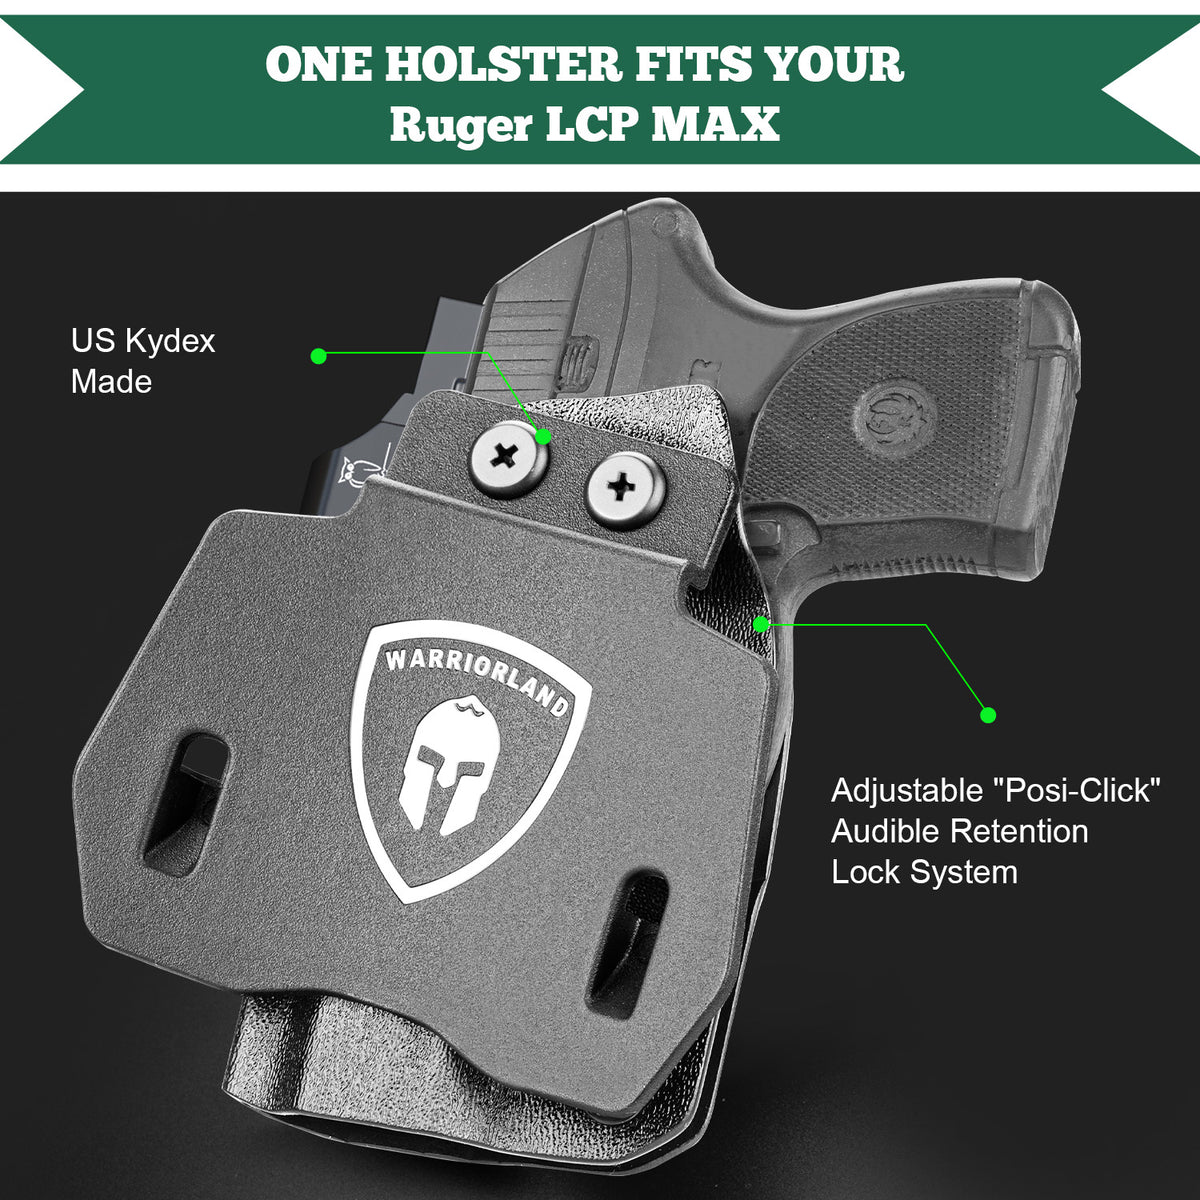 OWB Holster Optics Cut Fit Ruger LCP Max Pistol, Outside Waistband Open Carry Max .380 Holster with 1.75 Inch Paddle, Adj. Retention & Cant, Right Hand|WARRIORLAND